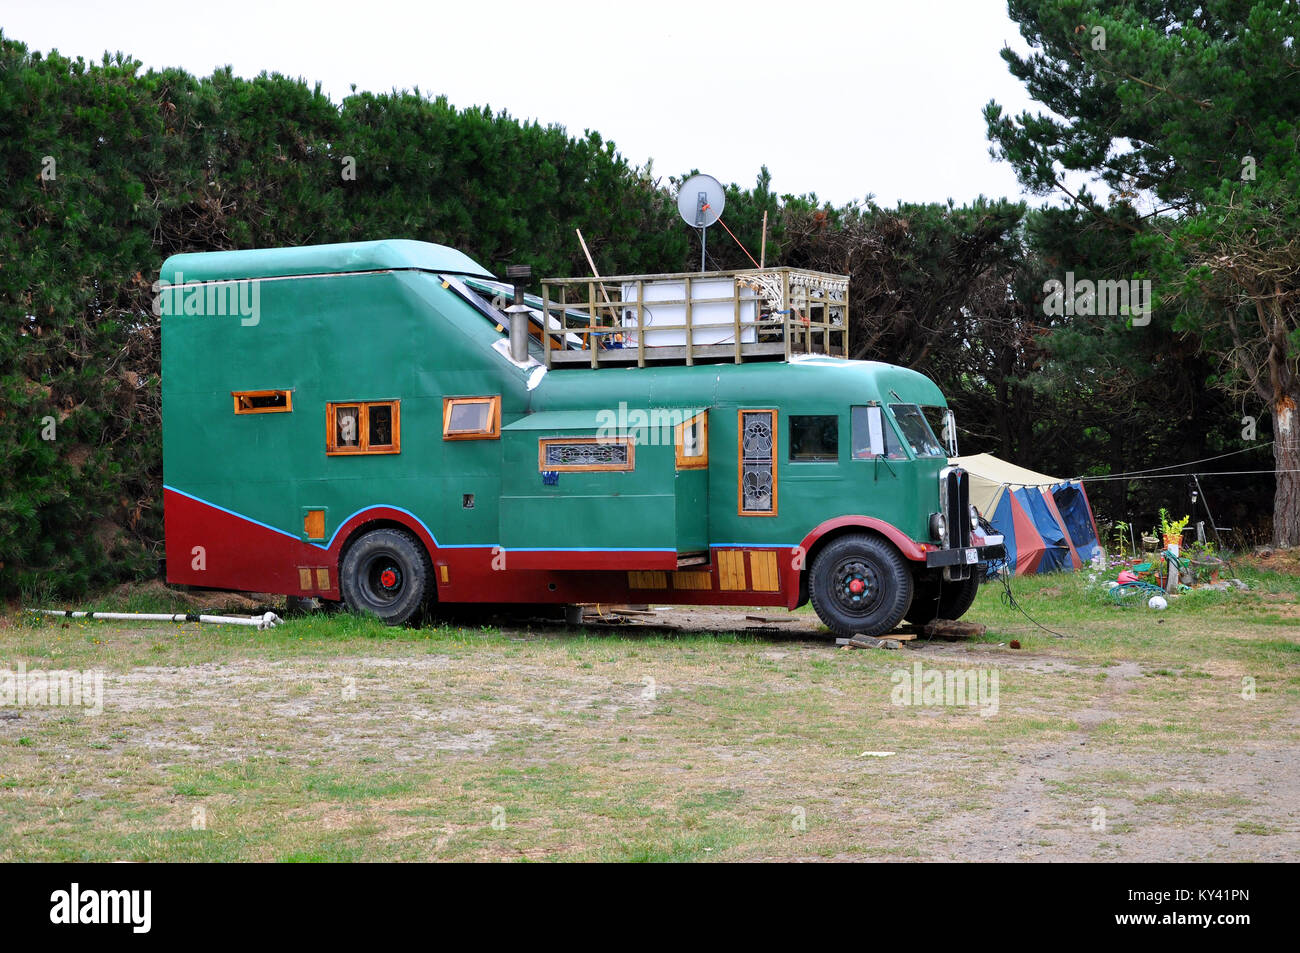 Homemade motorhome campervan, motor home camper van using old AEC vehicle, lorry bus or coach in New Zealand. Unique oddity Stock Photo